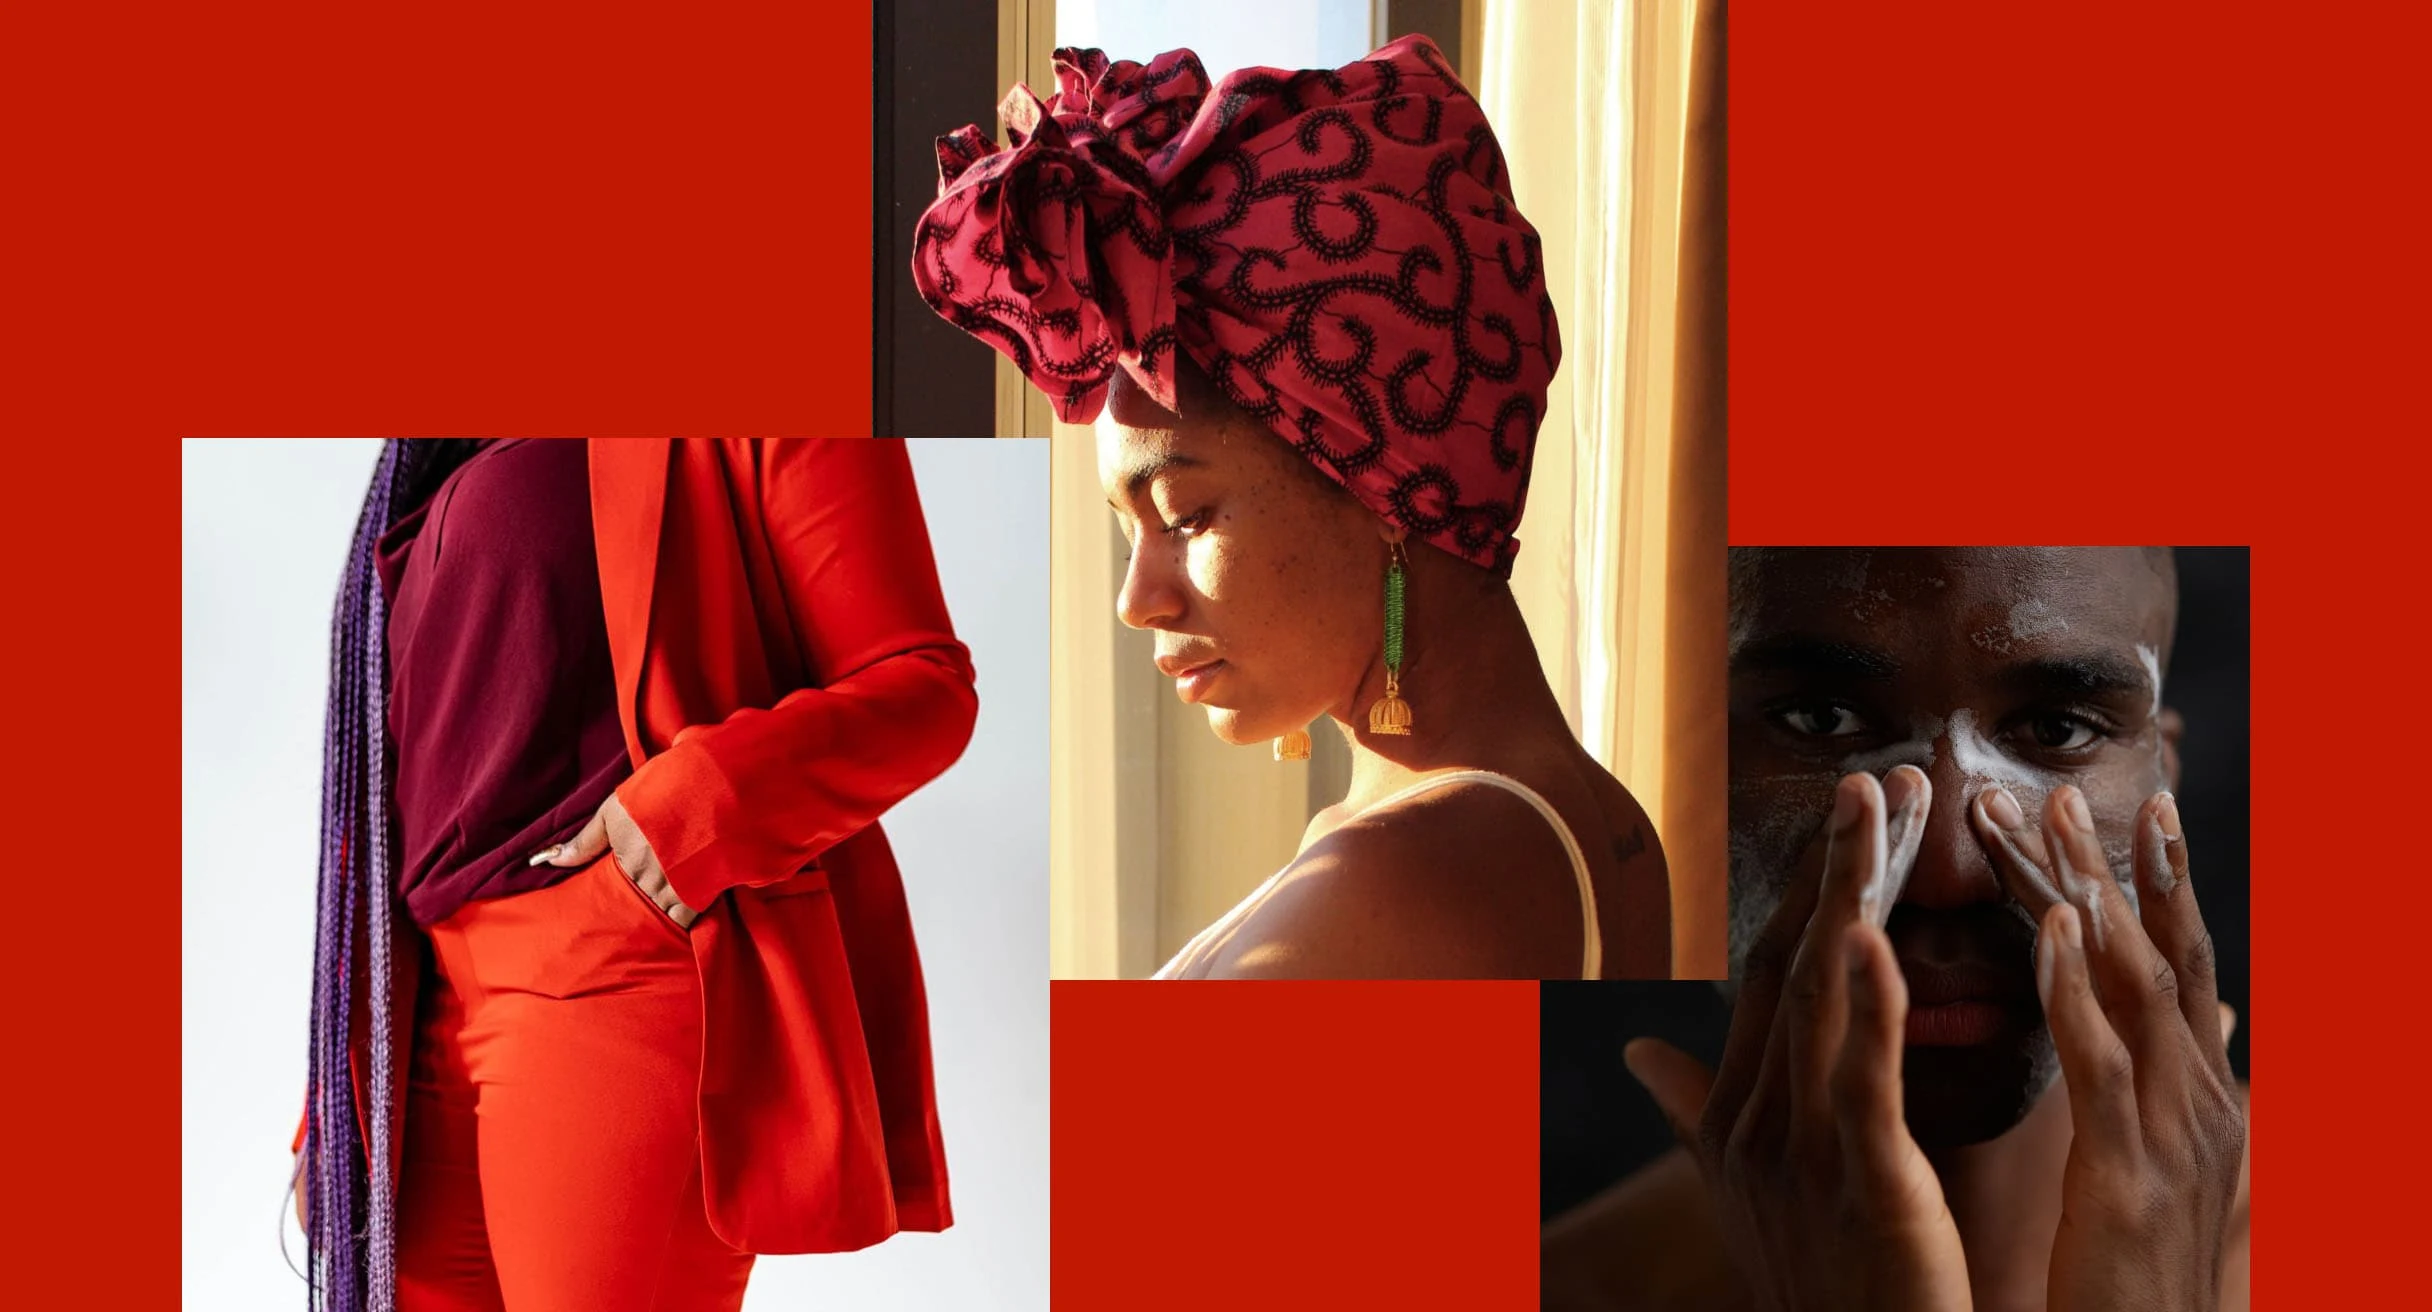 A trio of images featuring a red outfit from Style Shift House, a Black female model in a red Draped head wrap, and a Black male model applying face cream.